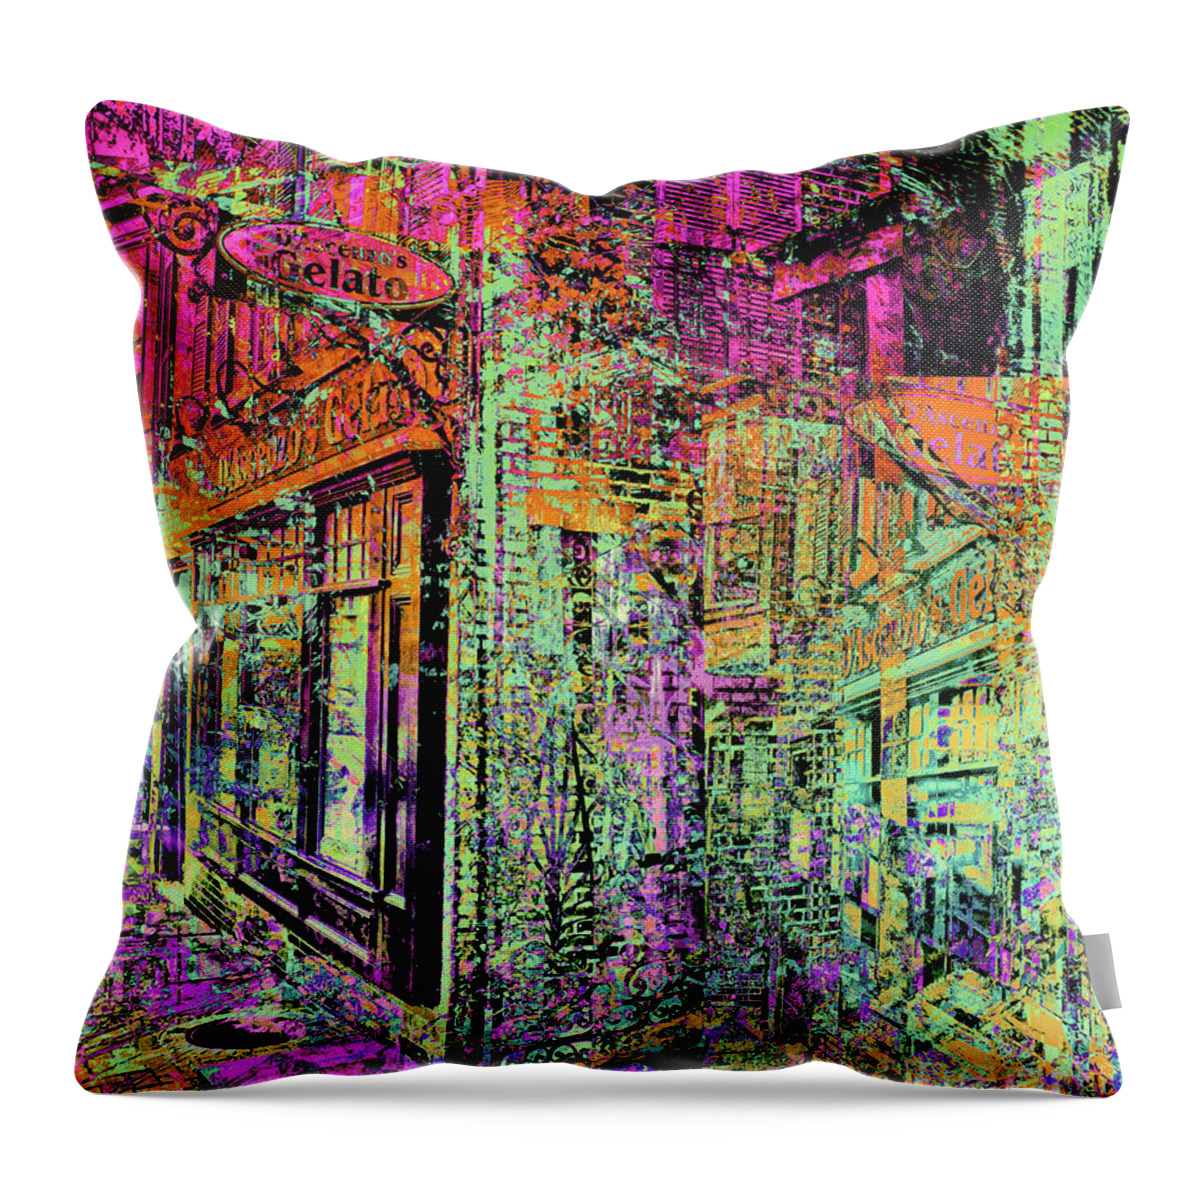 Berries Throw Pillow featuring the photograph Gelato Flavors by Sandy Moulder